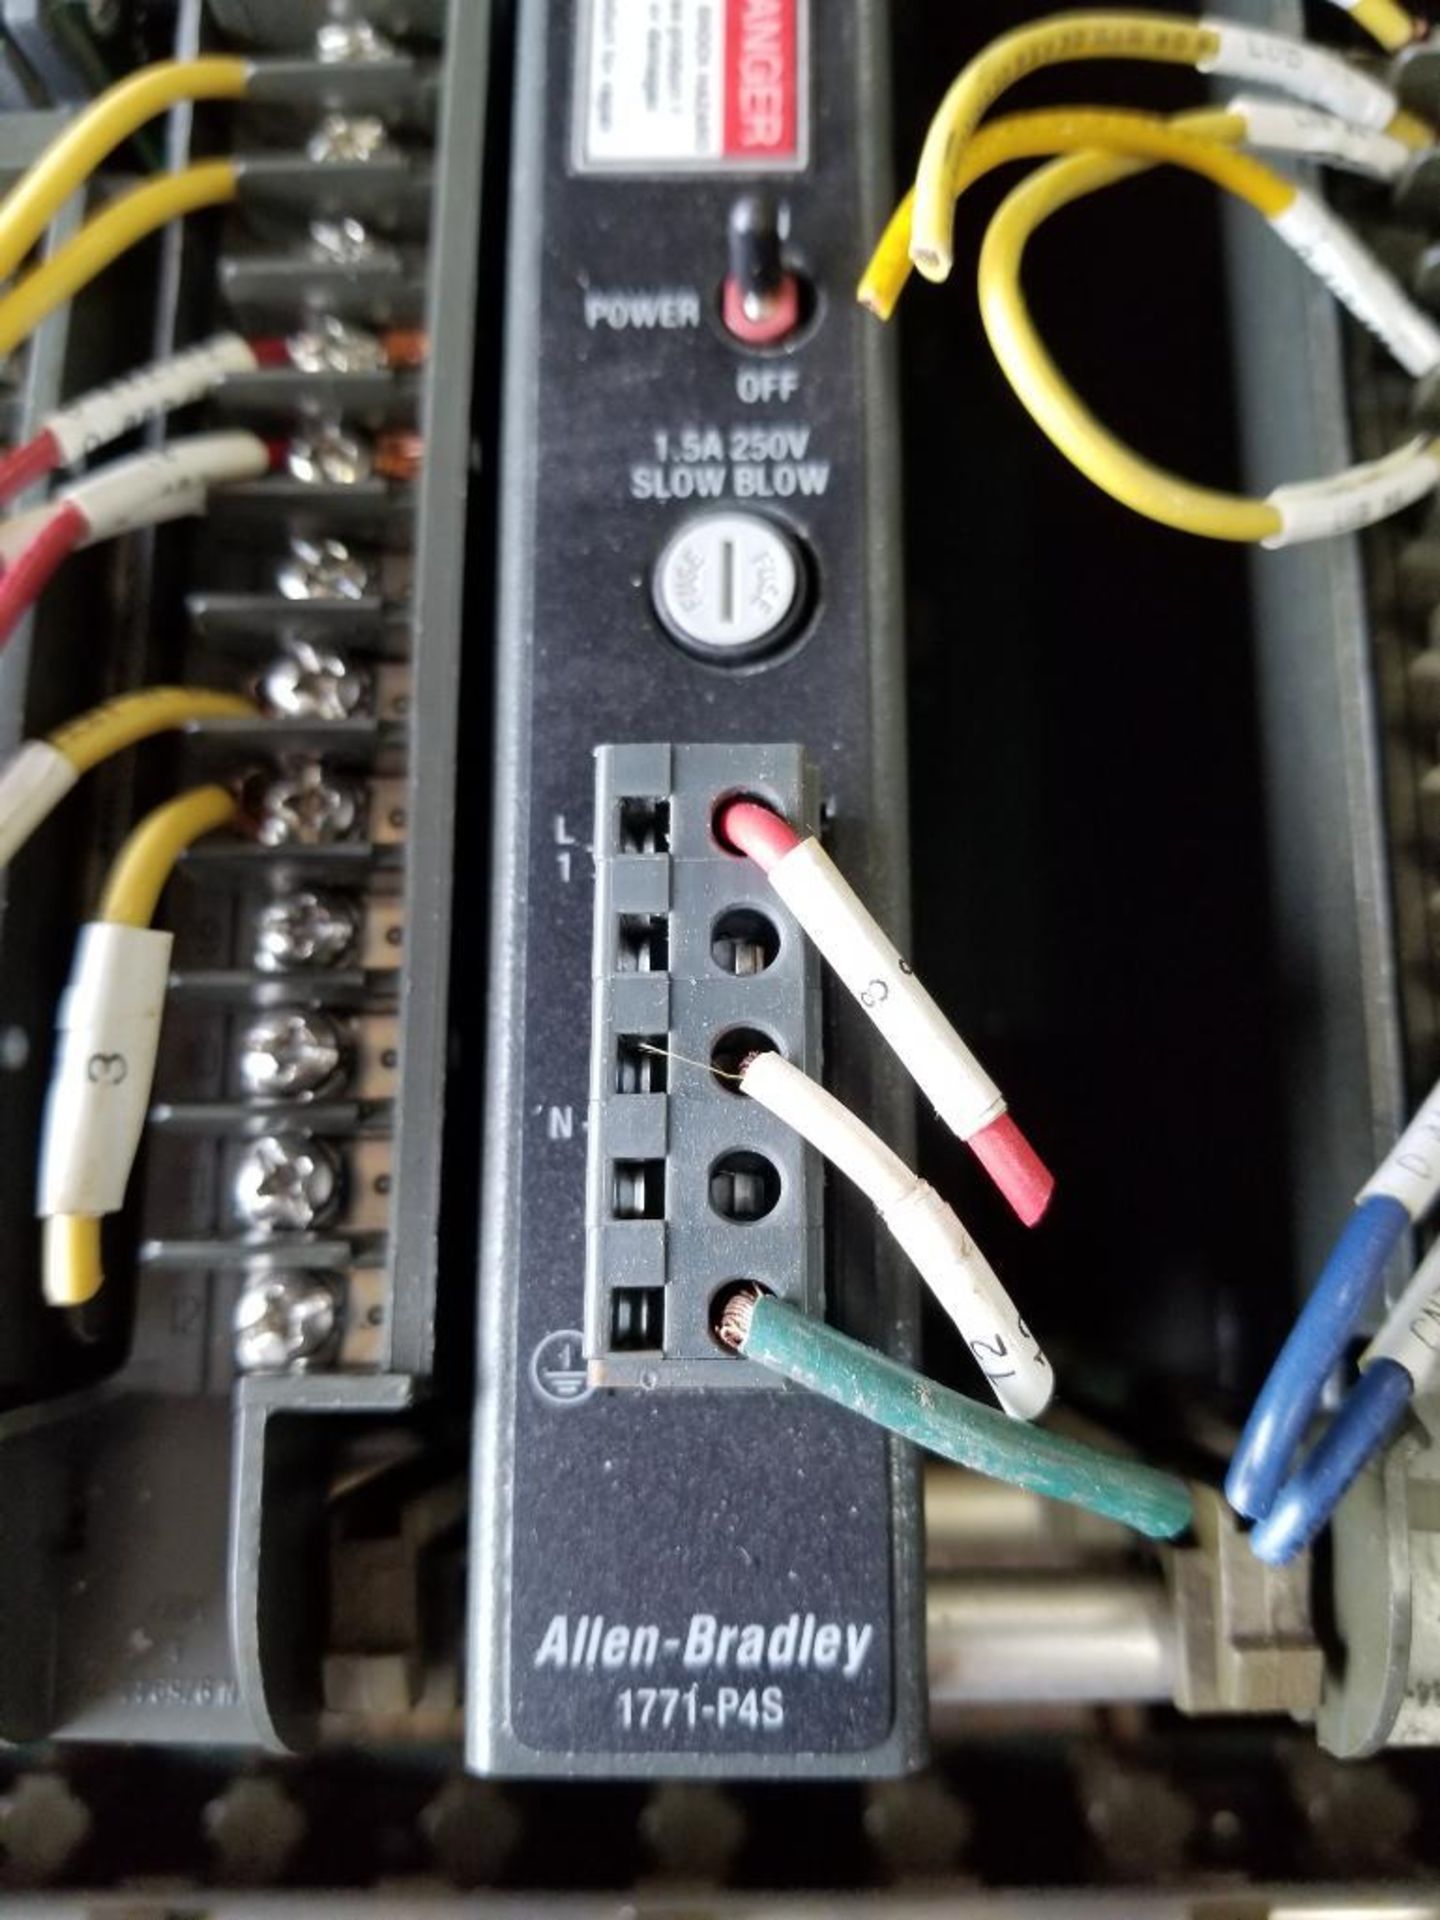 Allen Bradley PLC rack as pictured. - Image 7 of 7